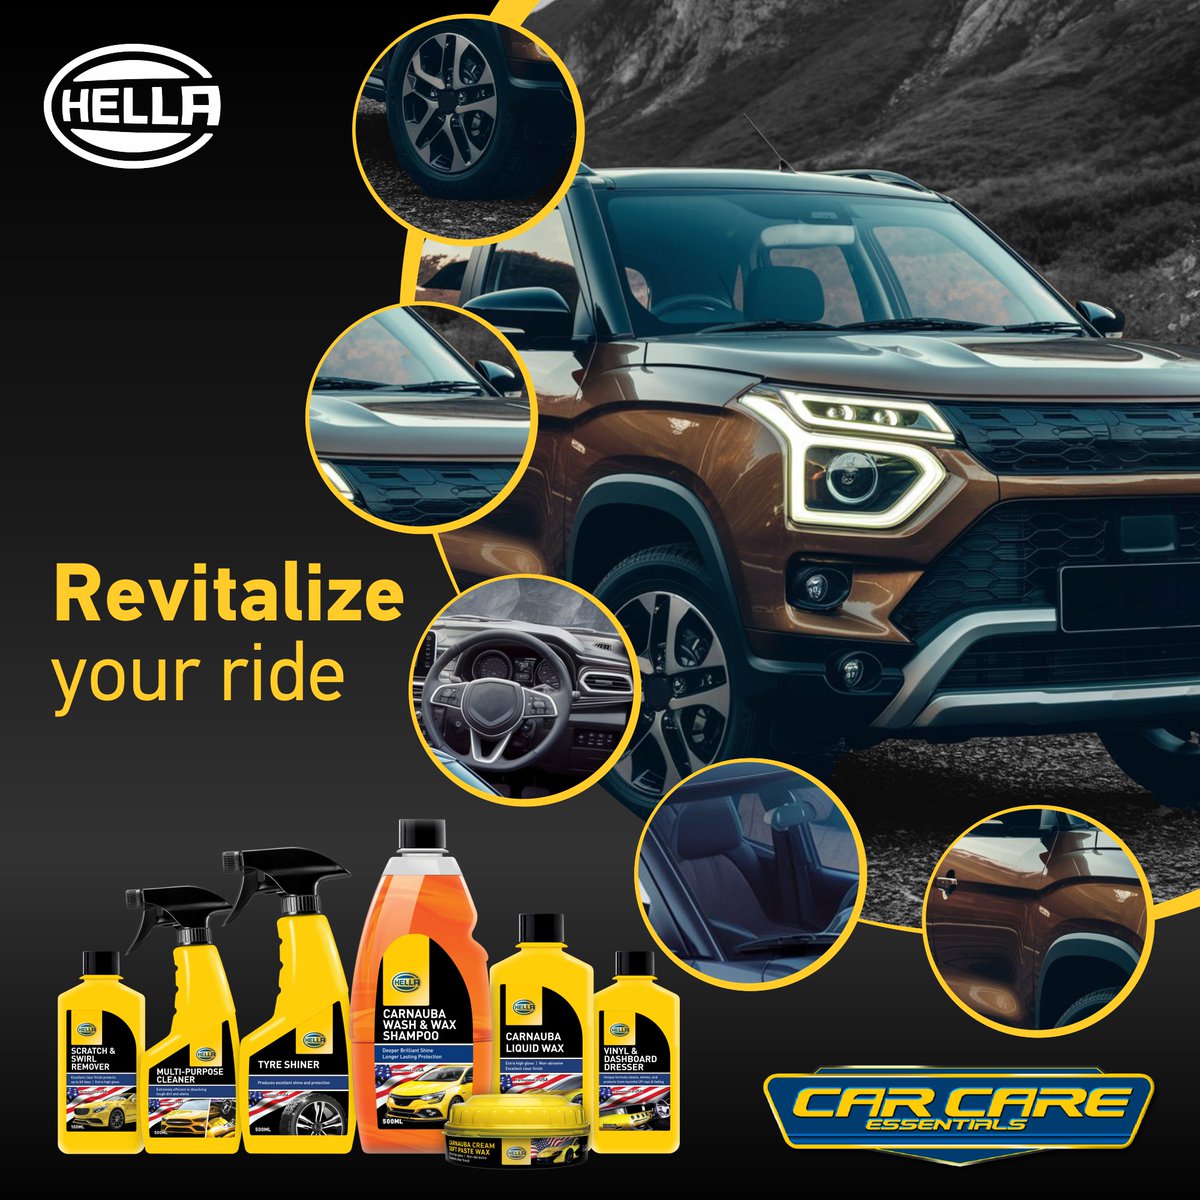 Preserve your investment.

Revive your car's showroom-like shine with the HELLA Car Care Range - The ultimate one-stop solution for all your car needs.

Know more:
🌐 hellacarcare.in
📞 1800 103 5405

#CarCare #CarDetailing #Cars #PaintProtection #CarLifestyle #Automotive